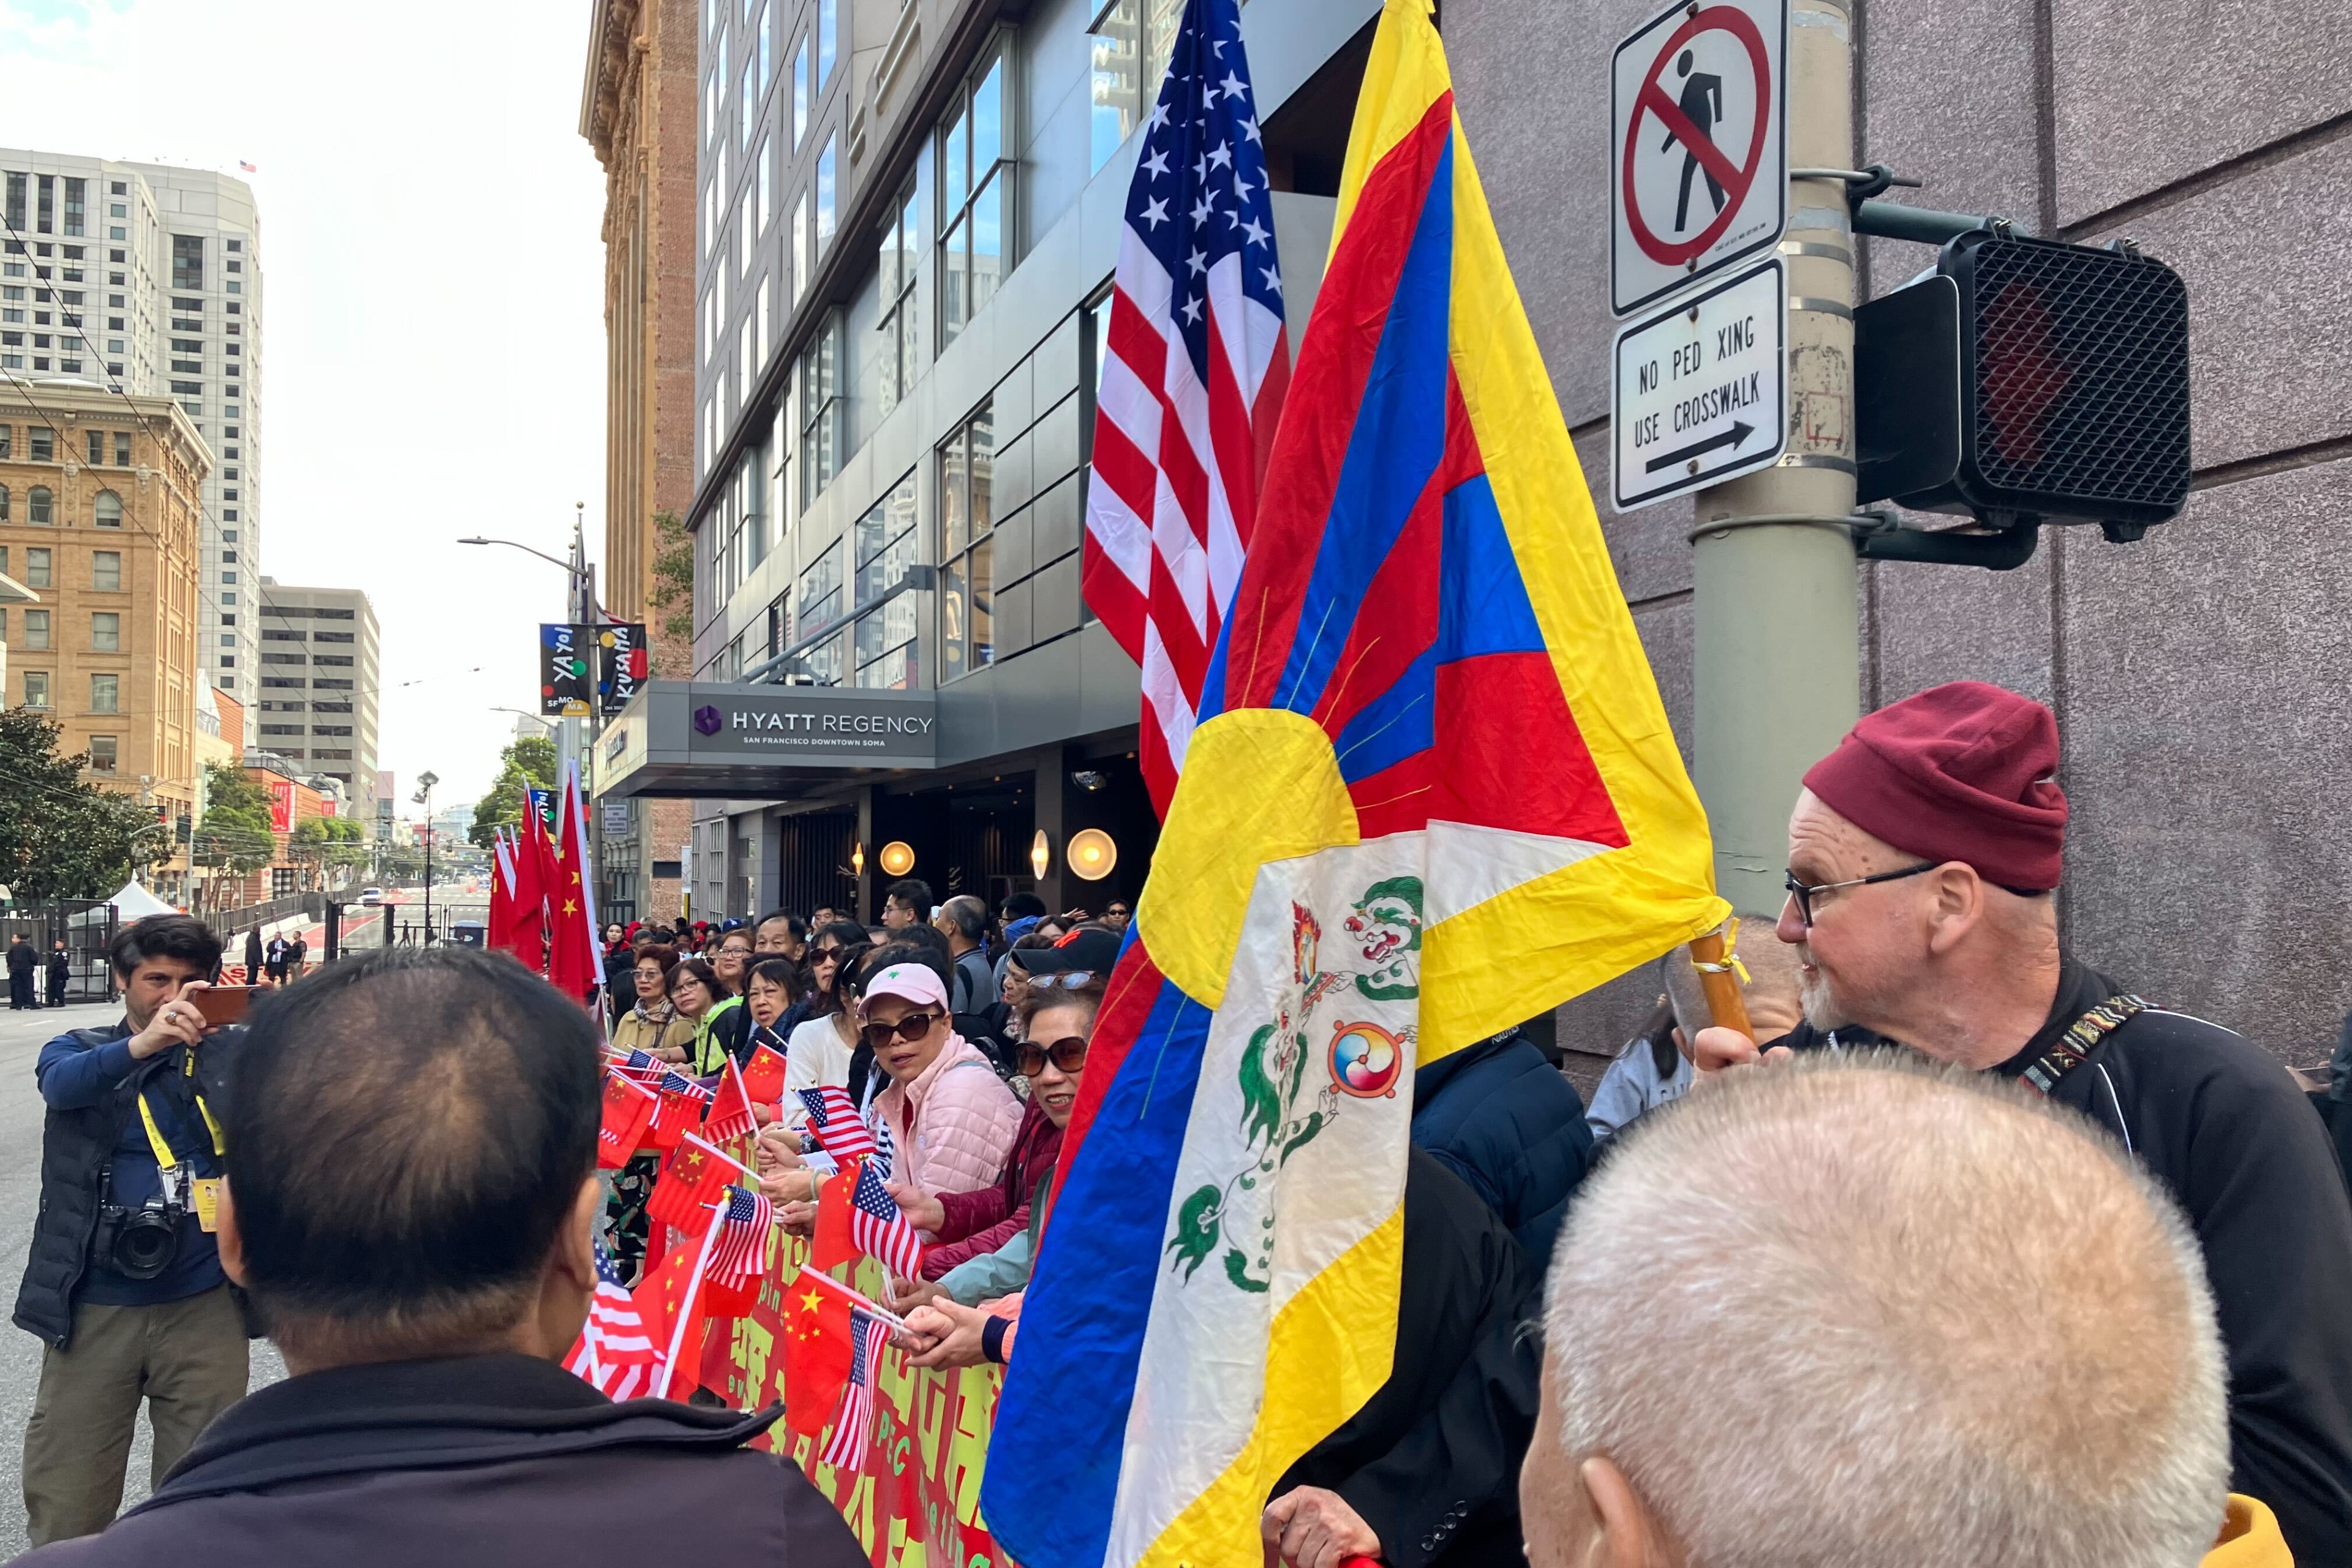 A long line of people stand along a city street holding American and Chinese flags and one man to the far right holds a Tibetan flag.